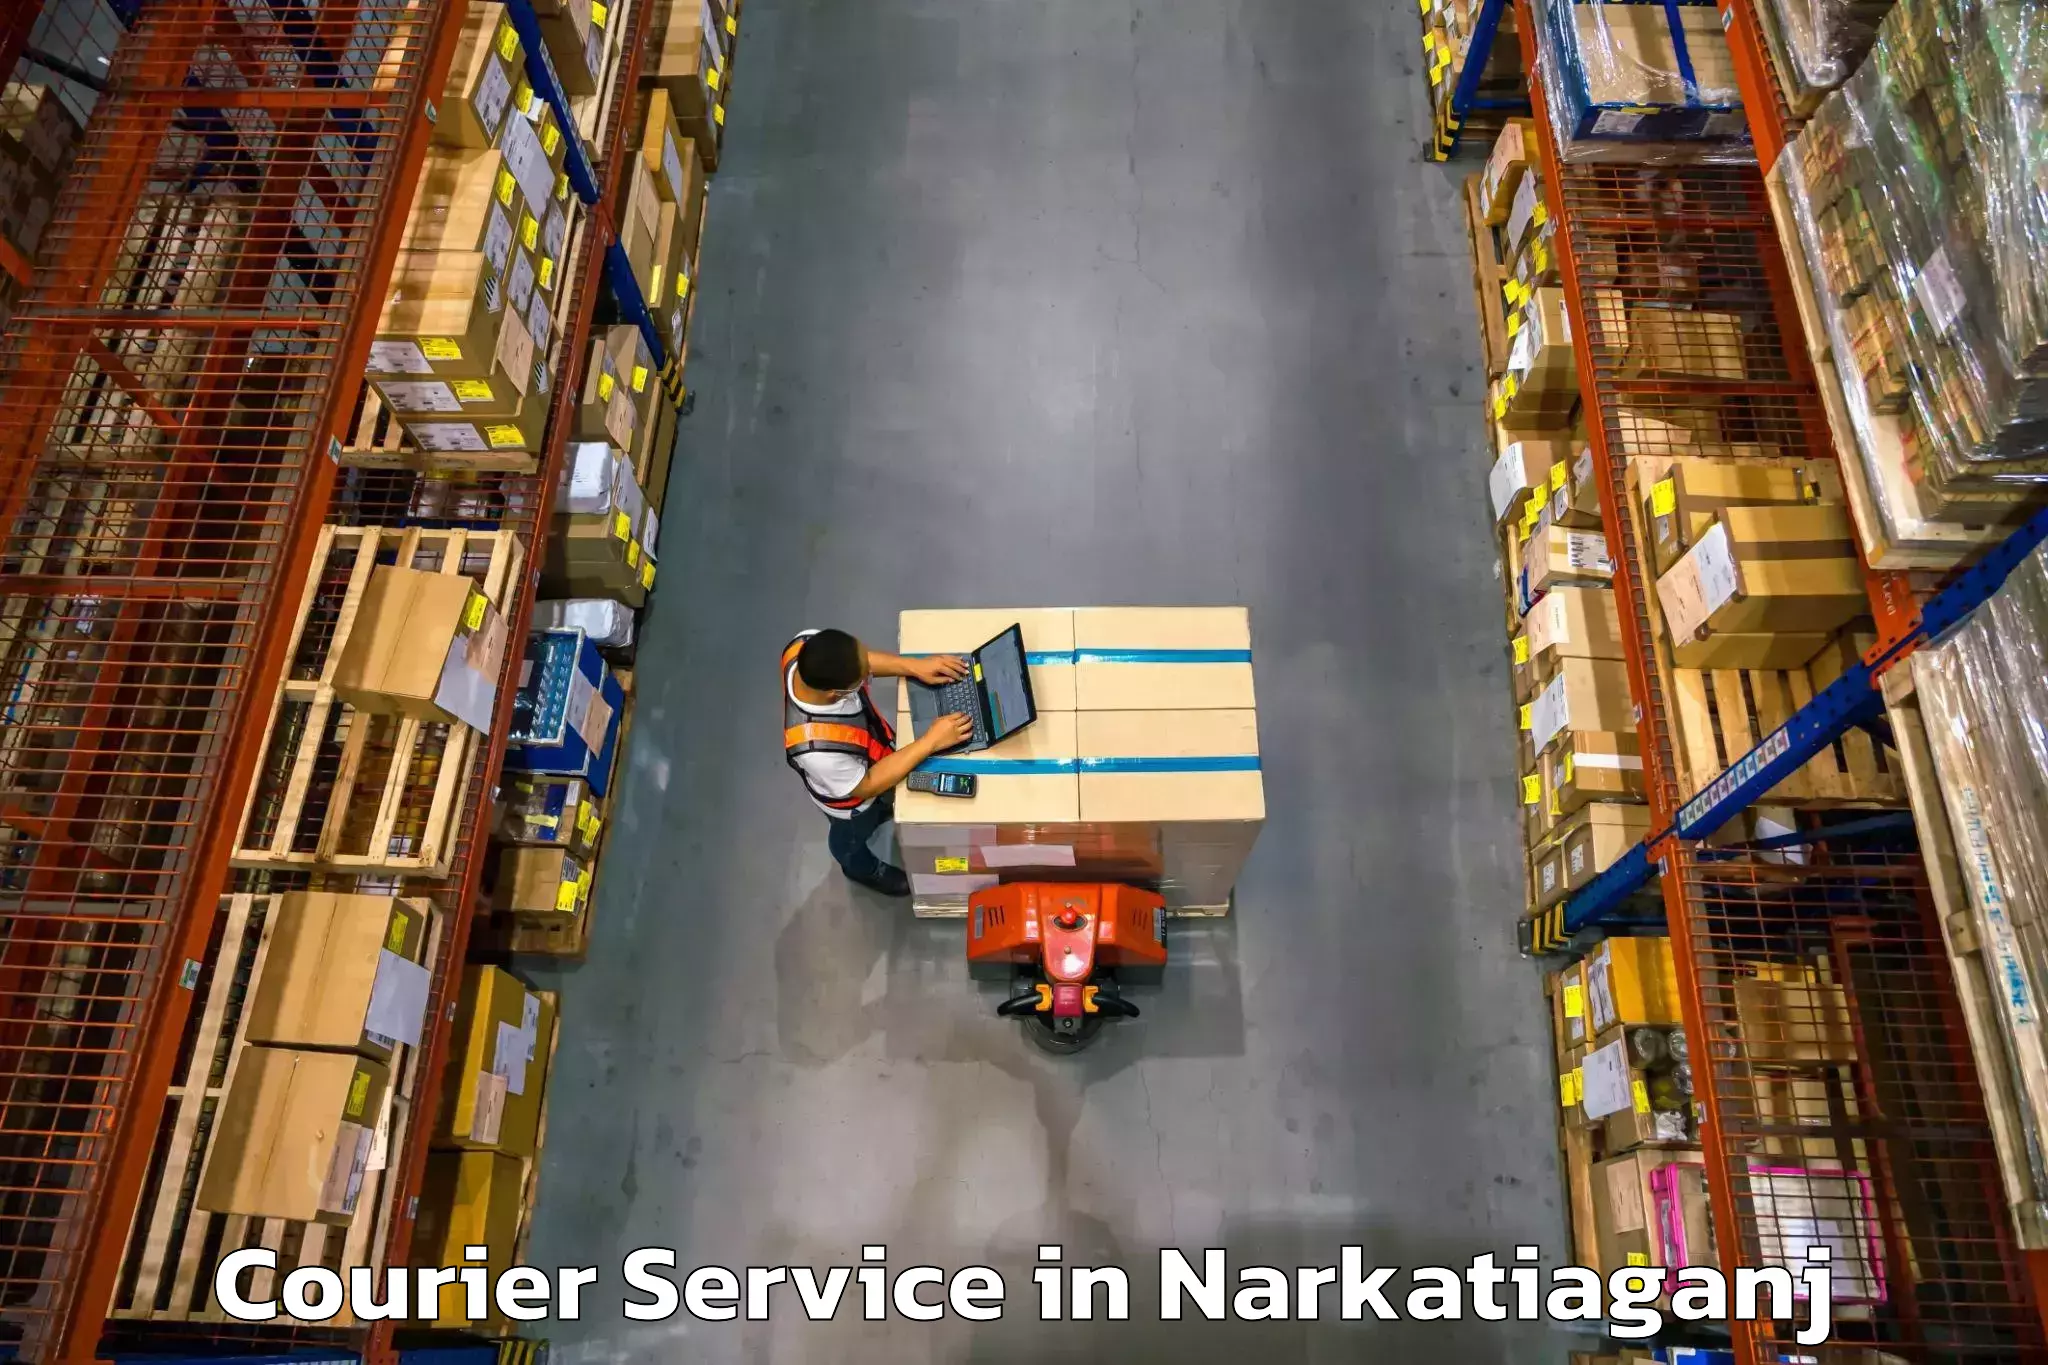 Subscription-based courier in Narkatiaganj